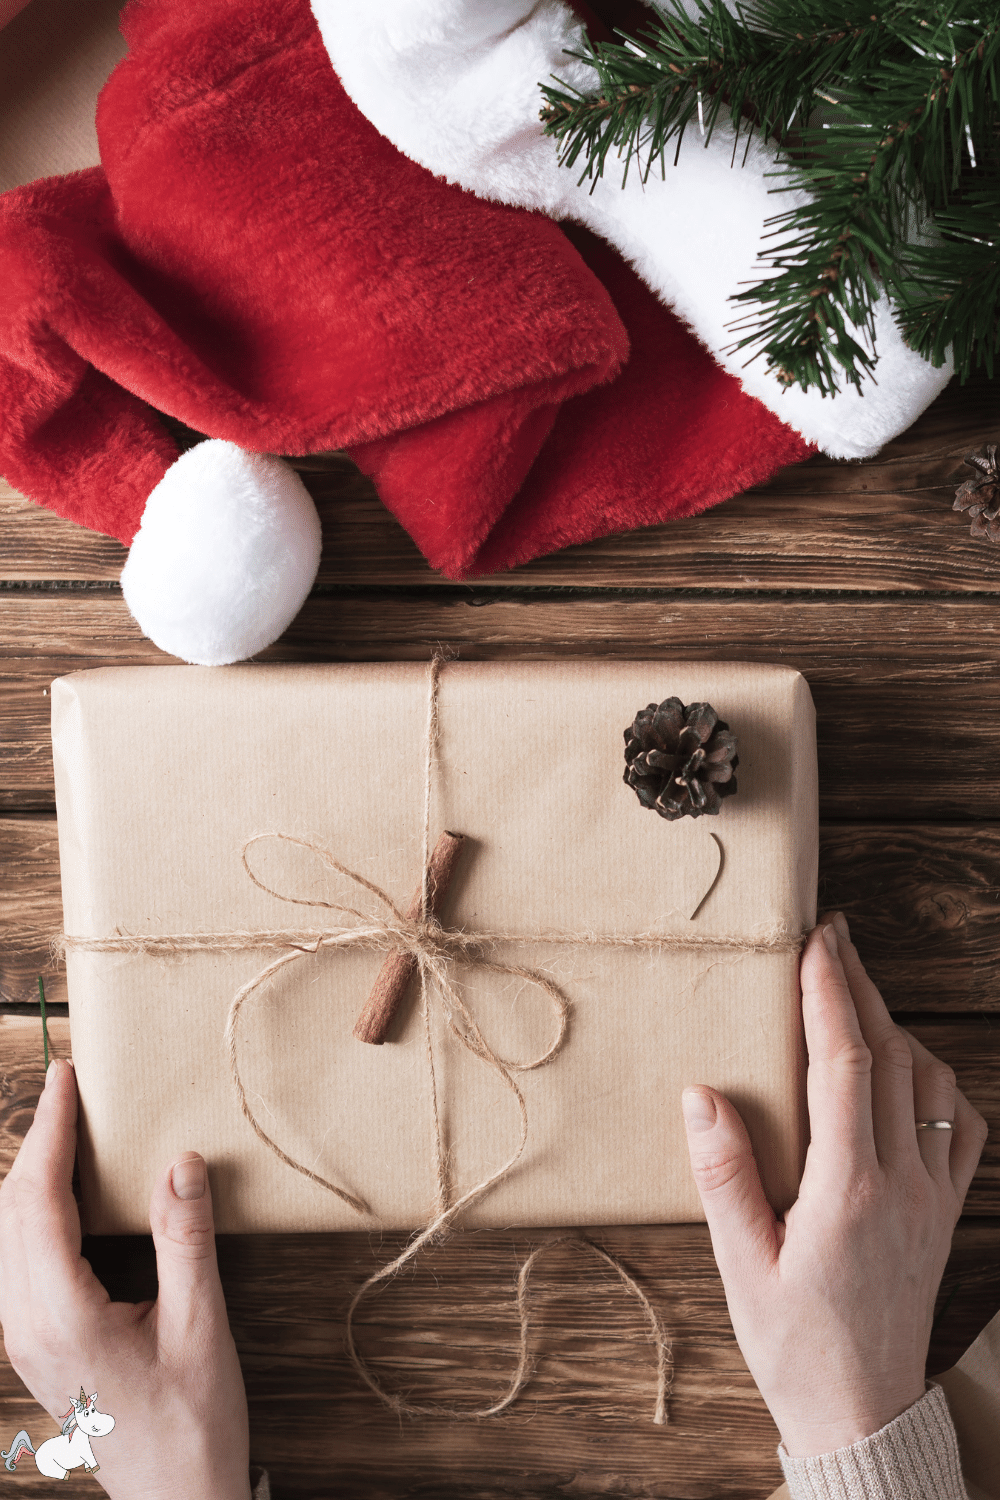 A handmade gift wrapped up with brown paper and a pinecone